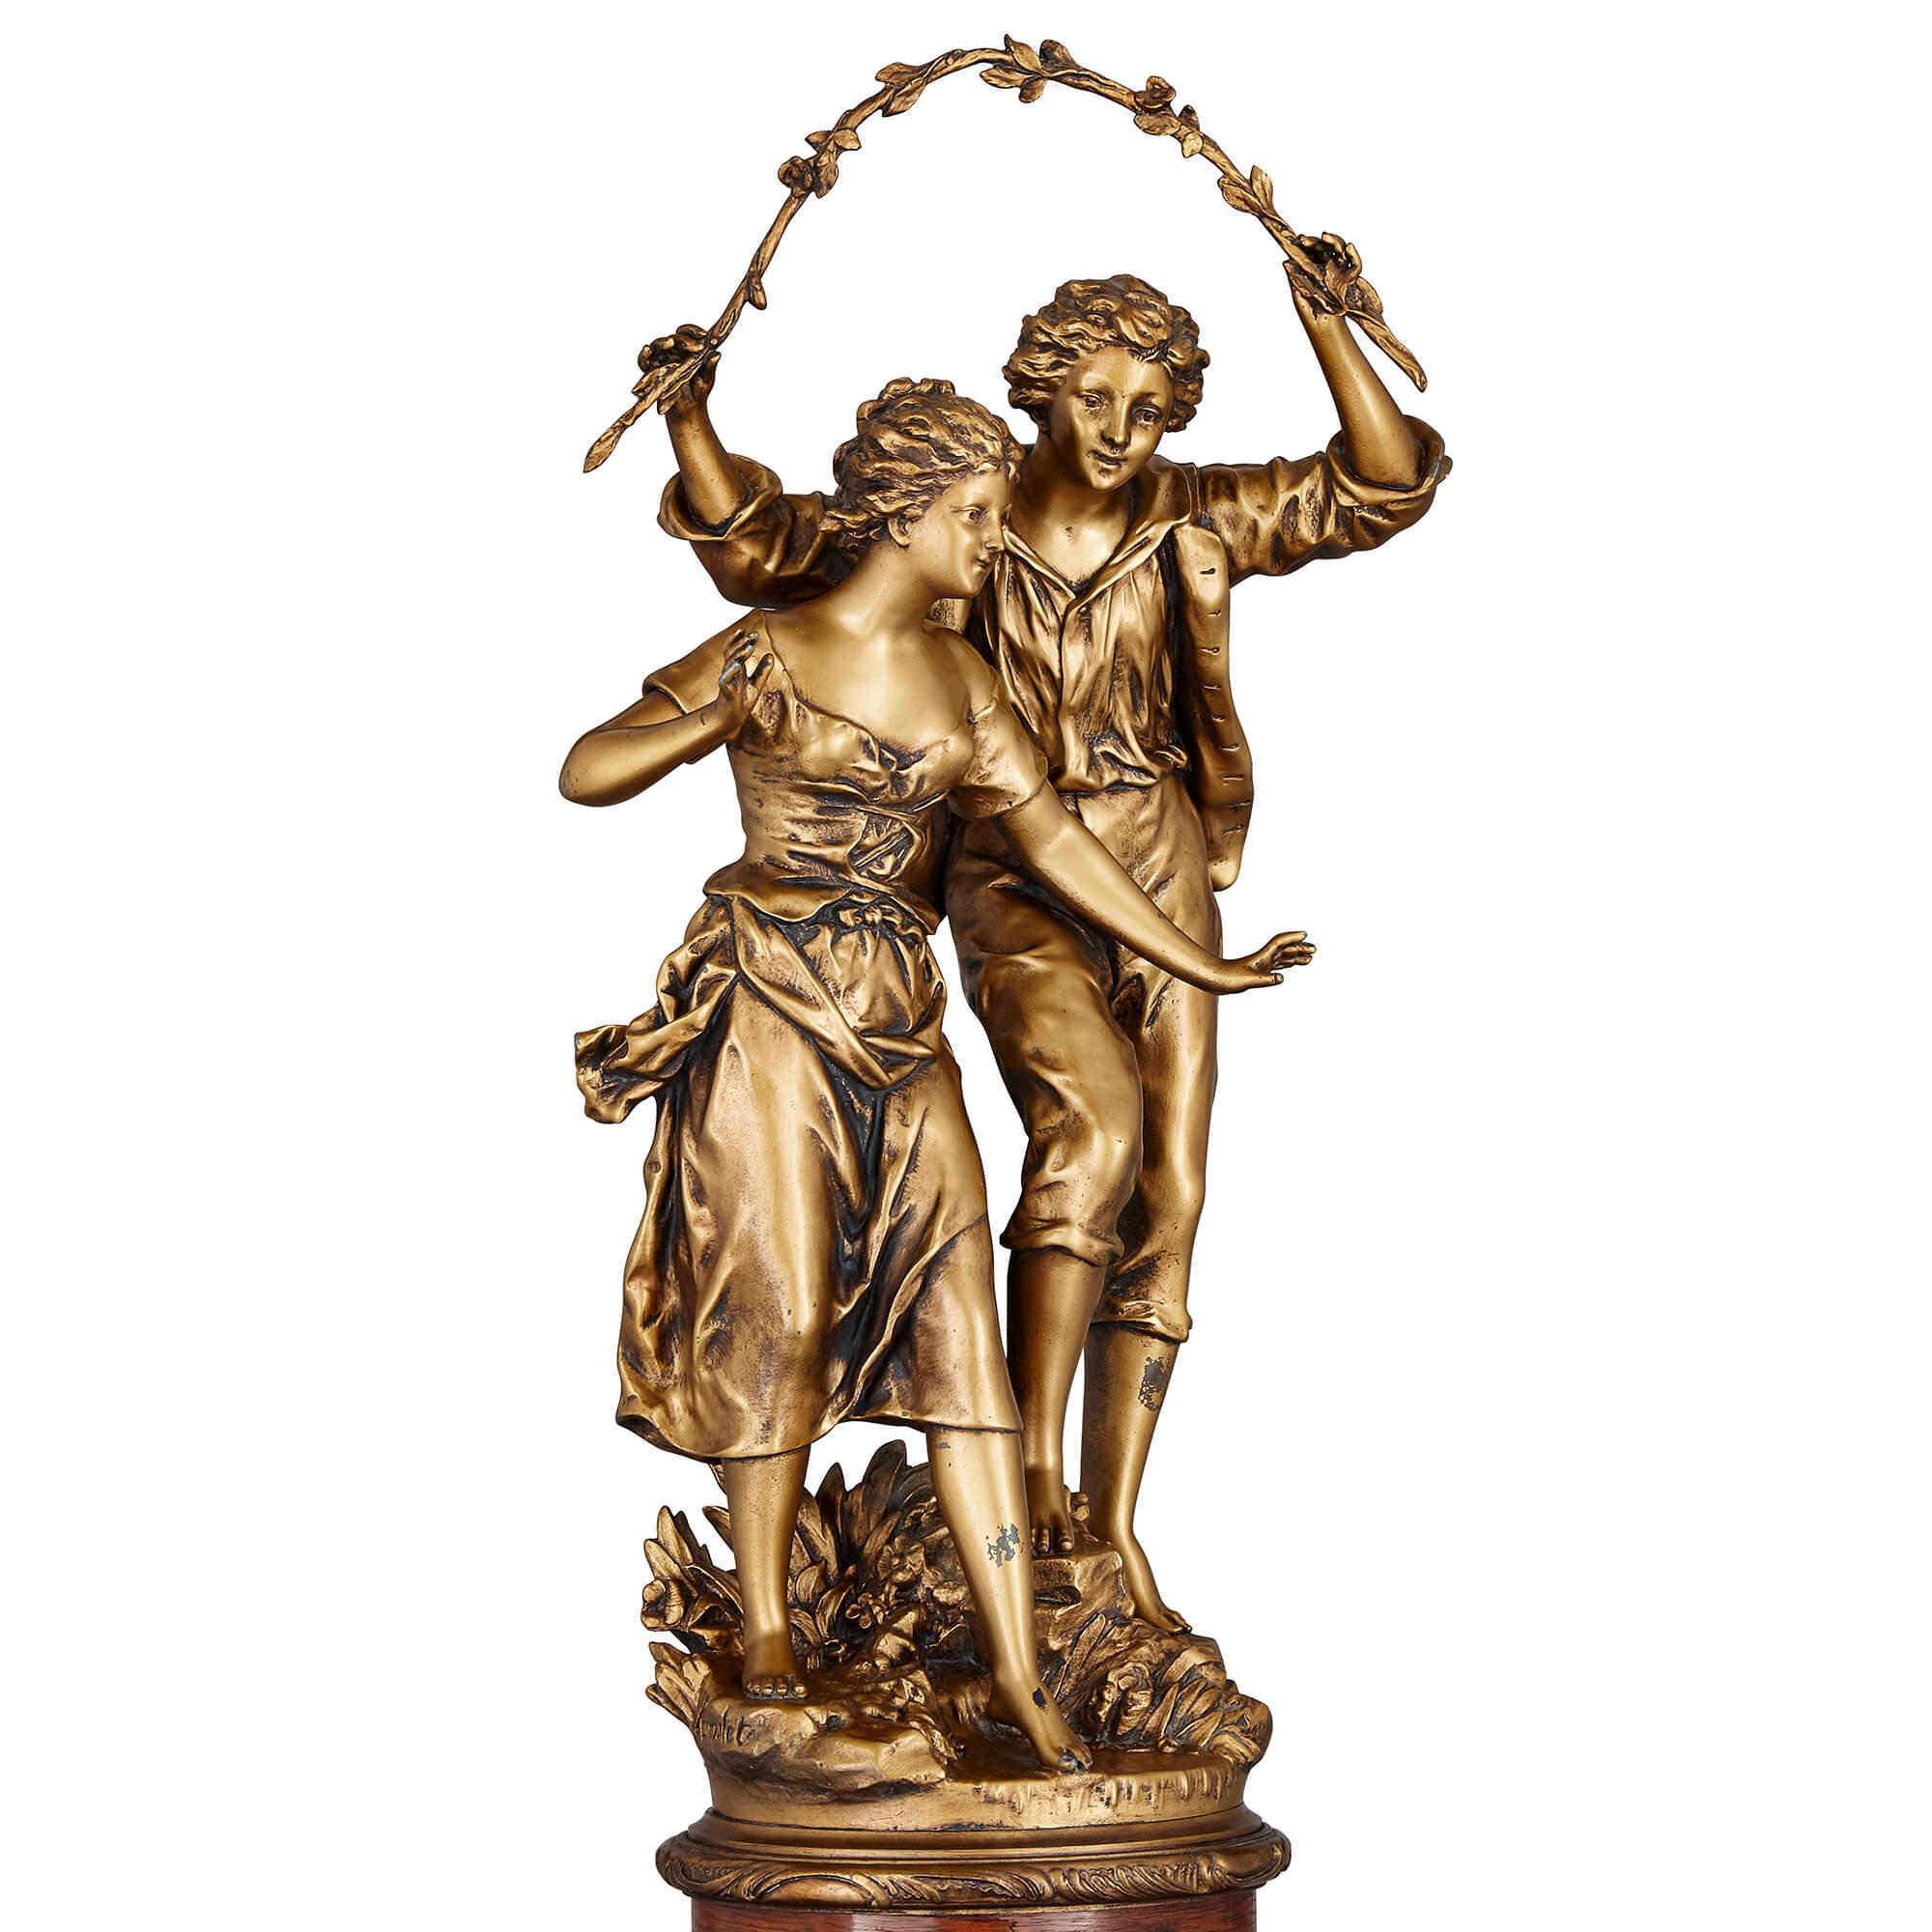 20th Century French Gilt Metal Sculpture on Neoclassical Pedestal by Ernest Rancoulet For Sale